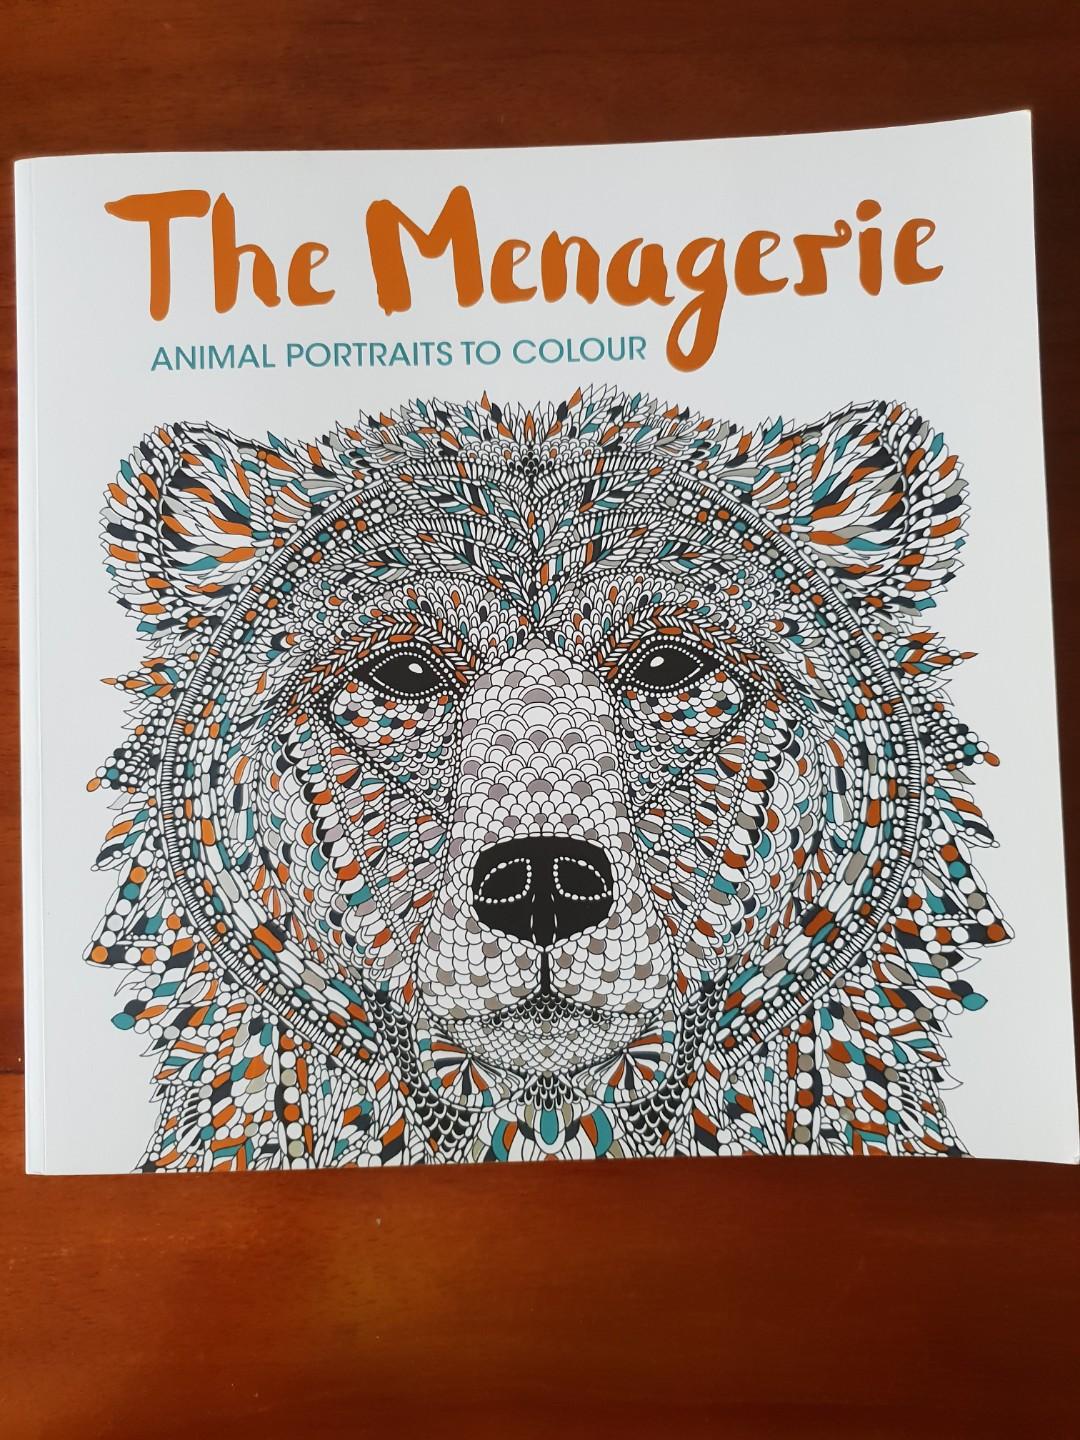 Download The Menagerie Animal Portraits Colouring Book Hobbies Toys Books Magazines Children S Books On Carousell